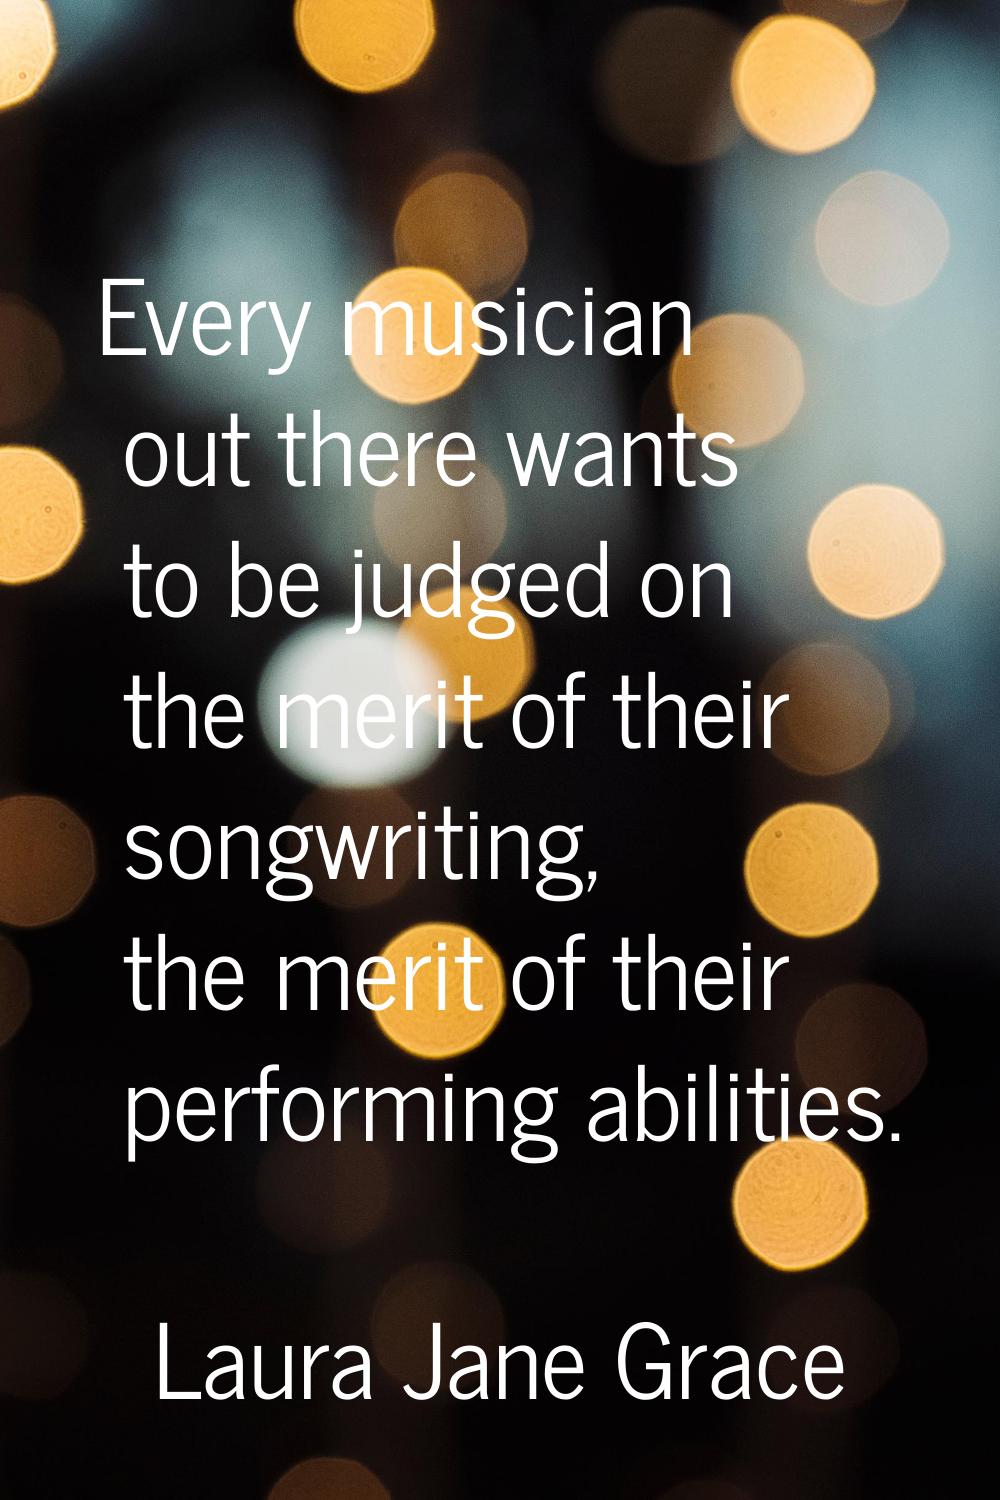 Every musician out there wants to be judged on the merit of their songwriting, the merit of their p